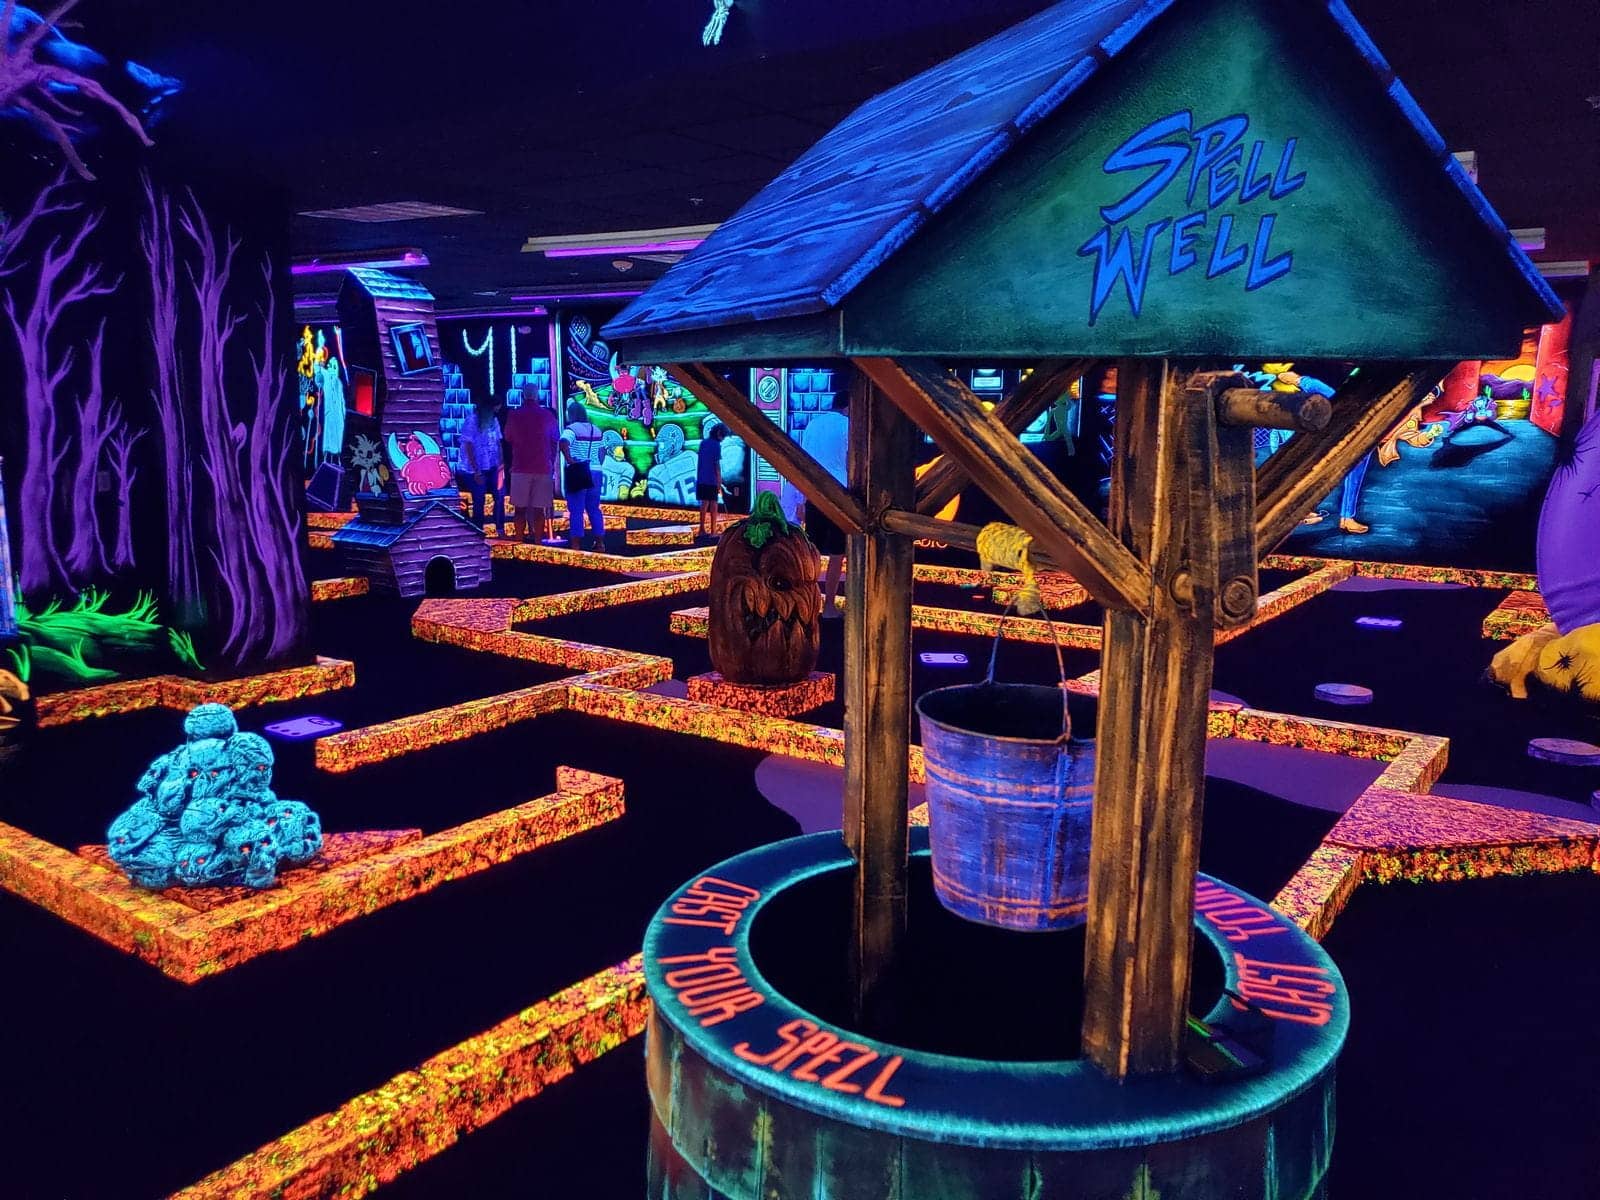 A glow-in-the-dark indoor golf course at Monster Mini Golf.